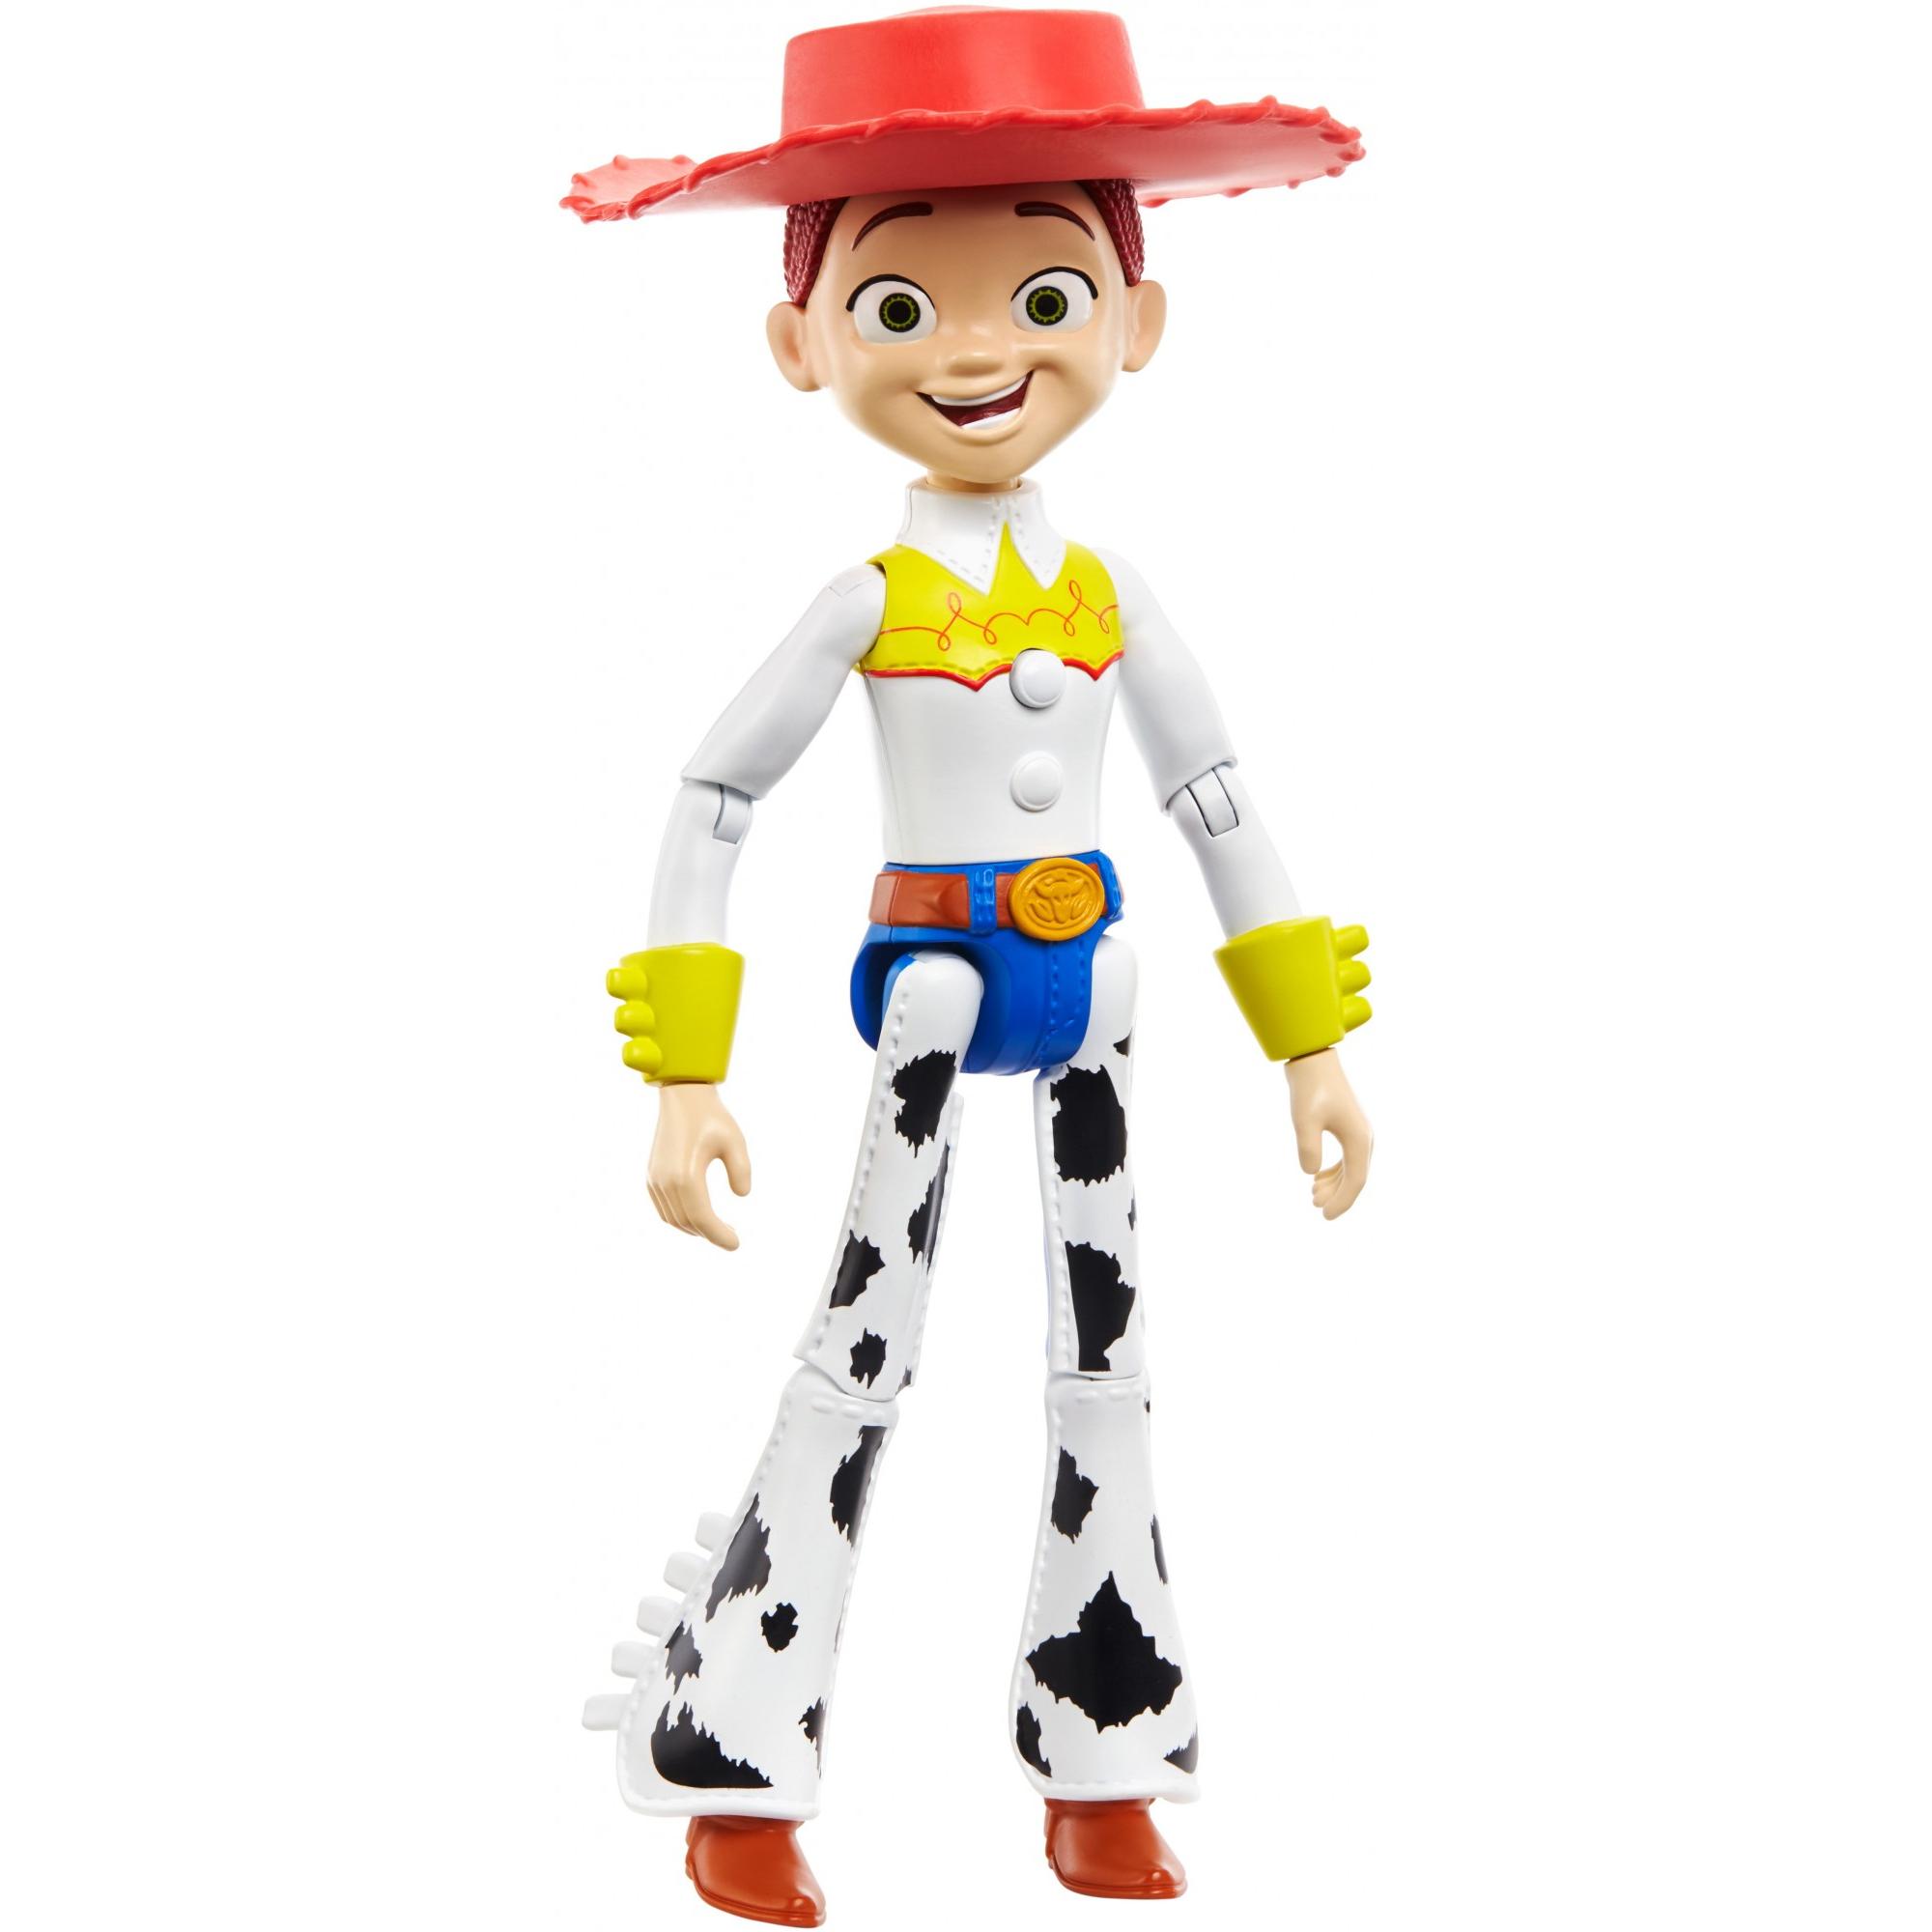 Disney Pixar Toy Story True Talkers Jessie Figure with 15+ Phrases - image 1 of 9